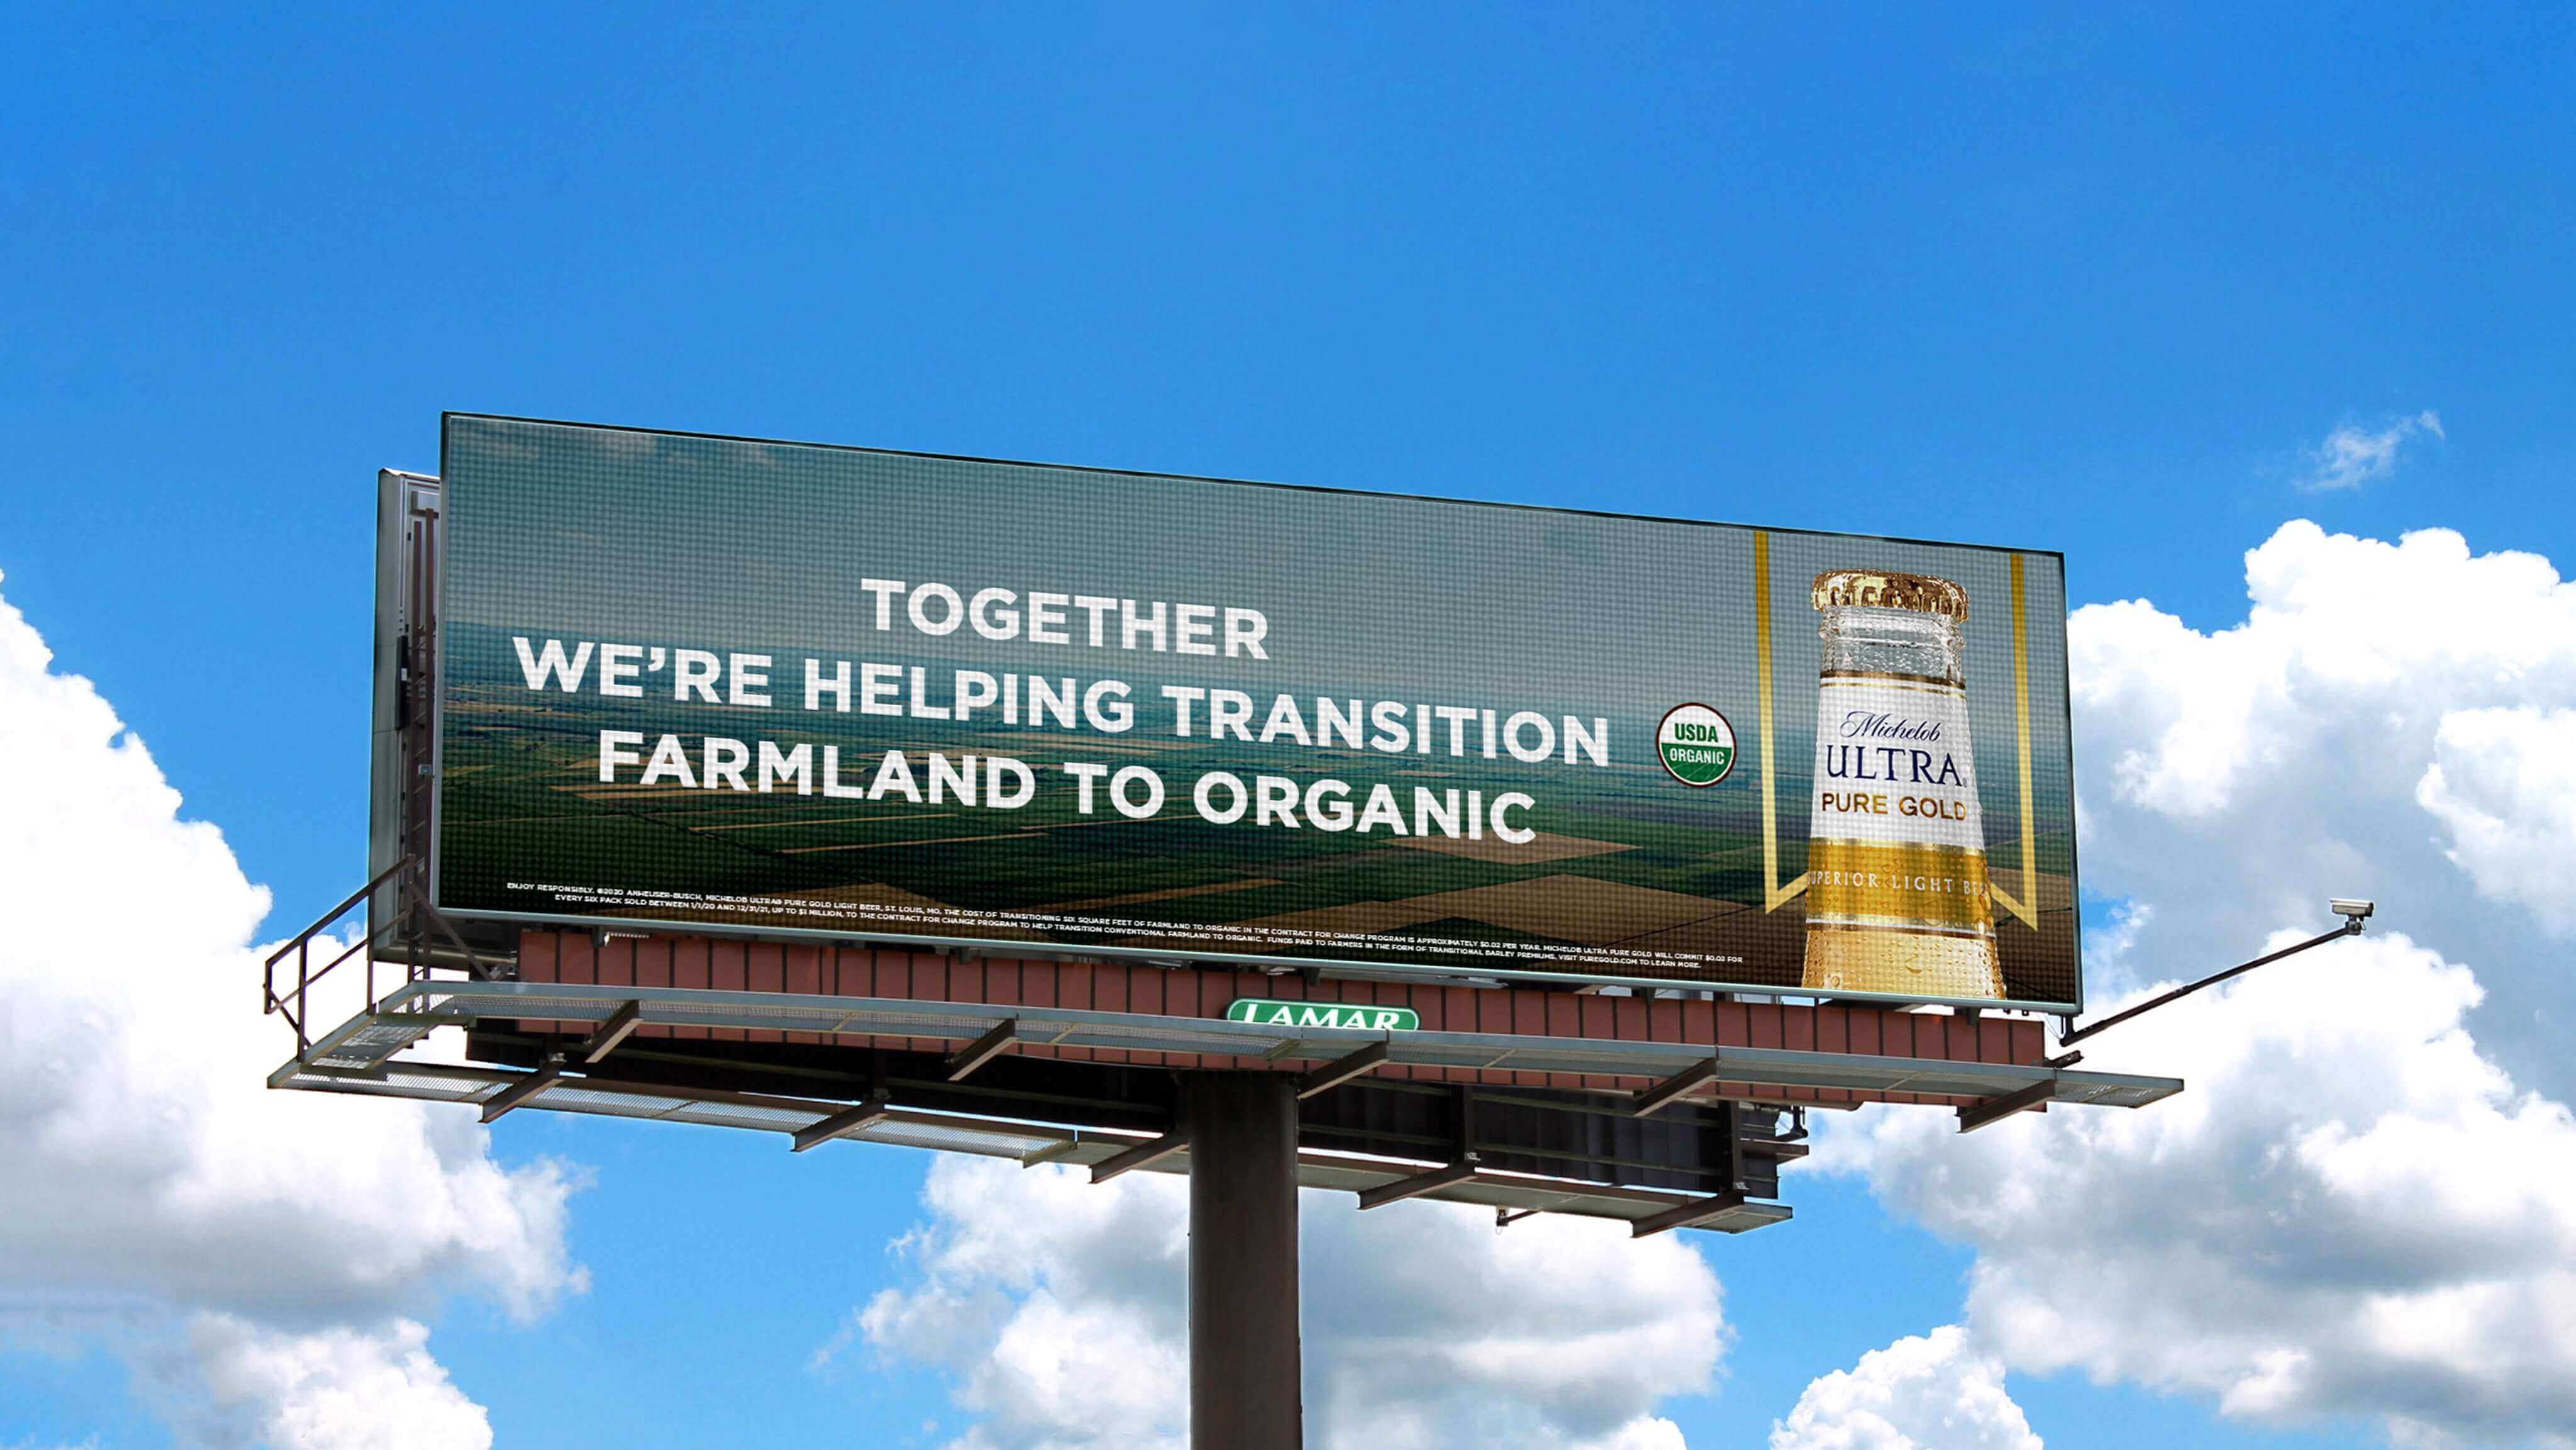 Interview: How Lamar Successfully Adopted Programmatic OOH